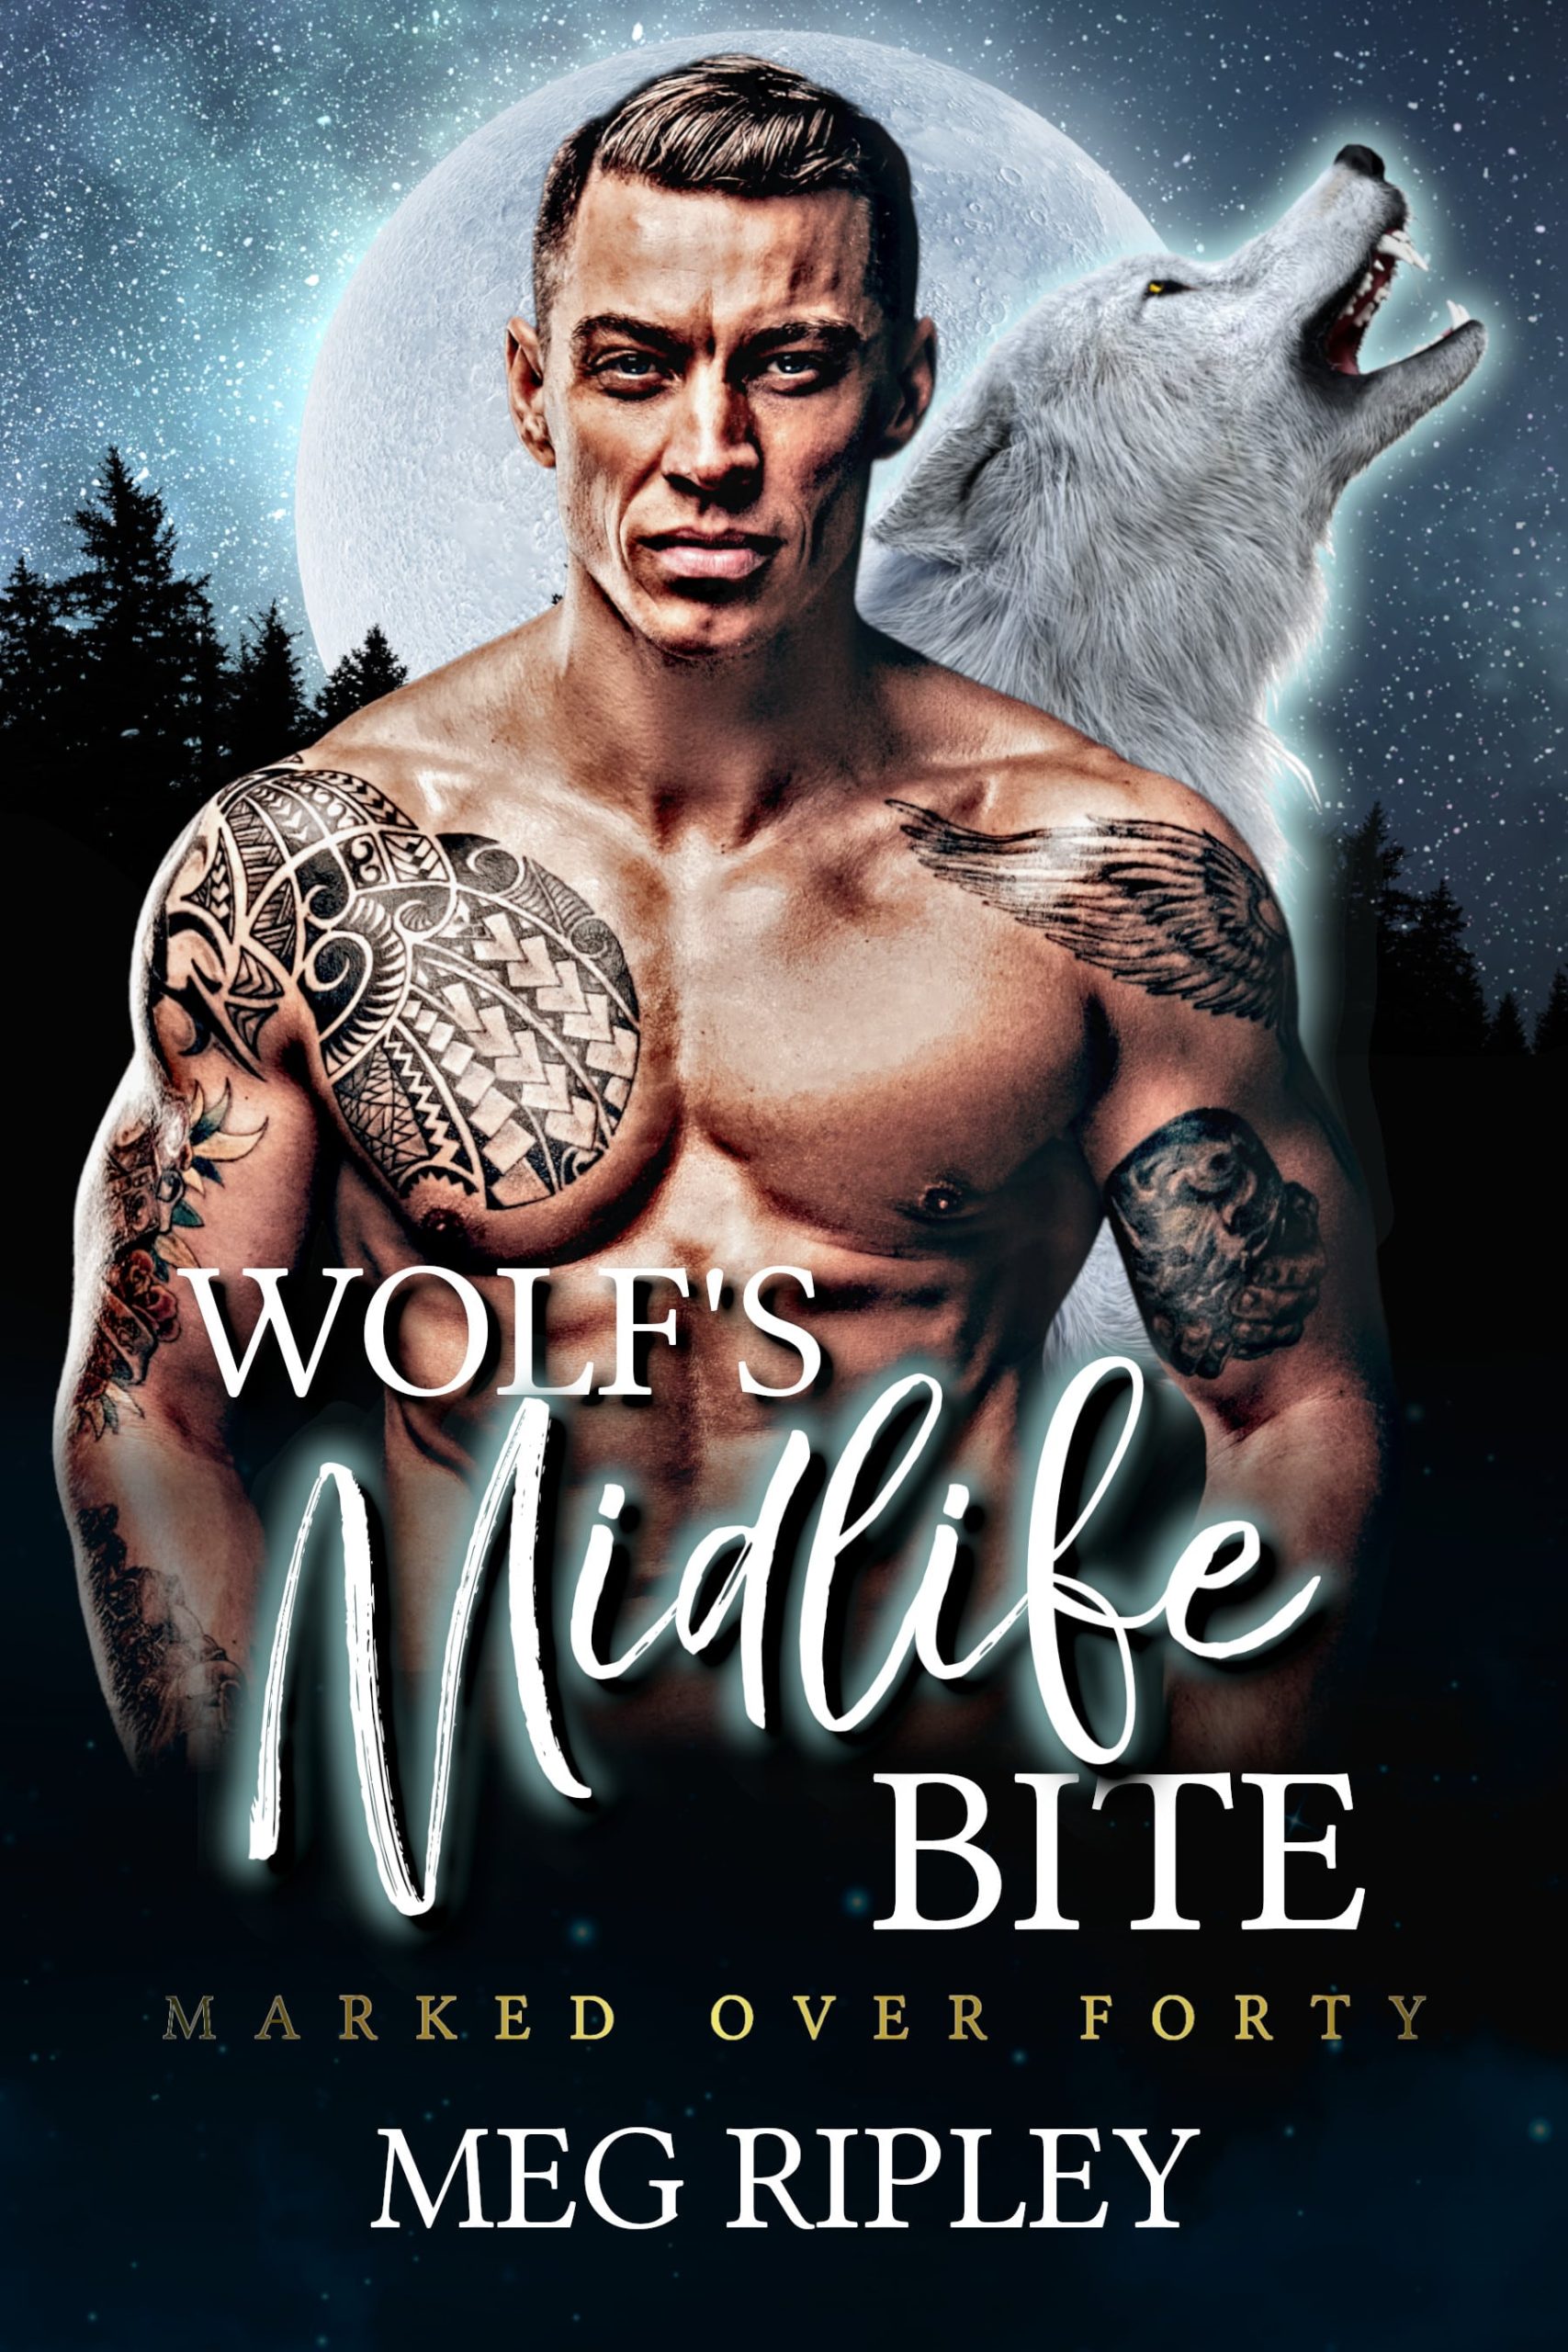 Wolf’s Midlife Bite by Meg Ripley PDF Download